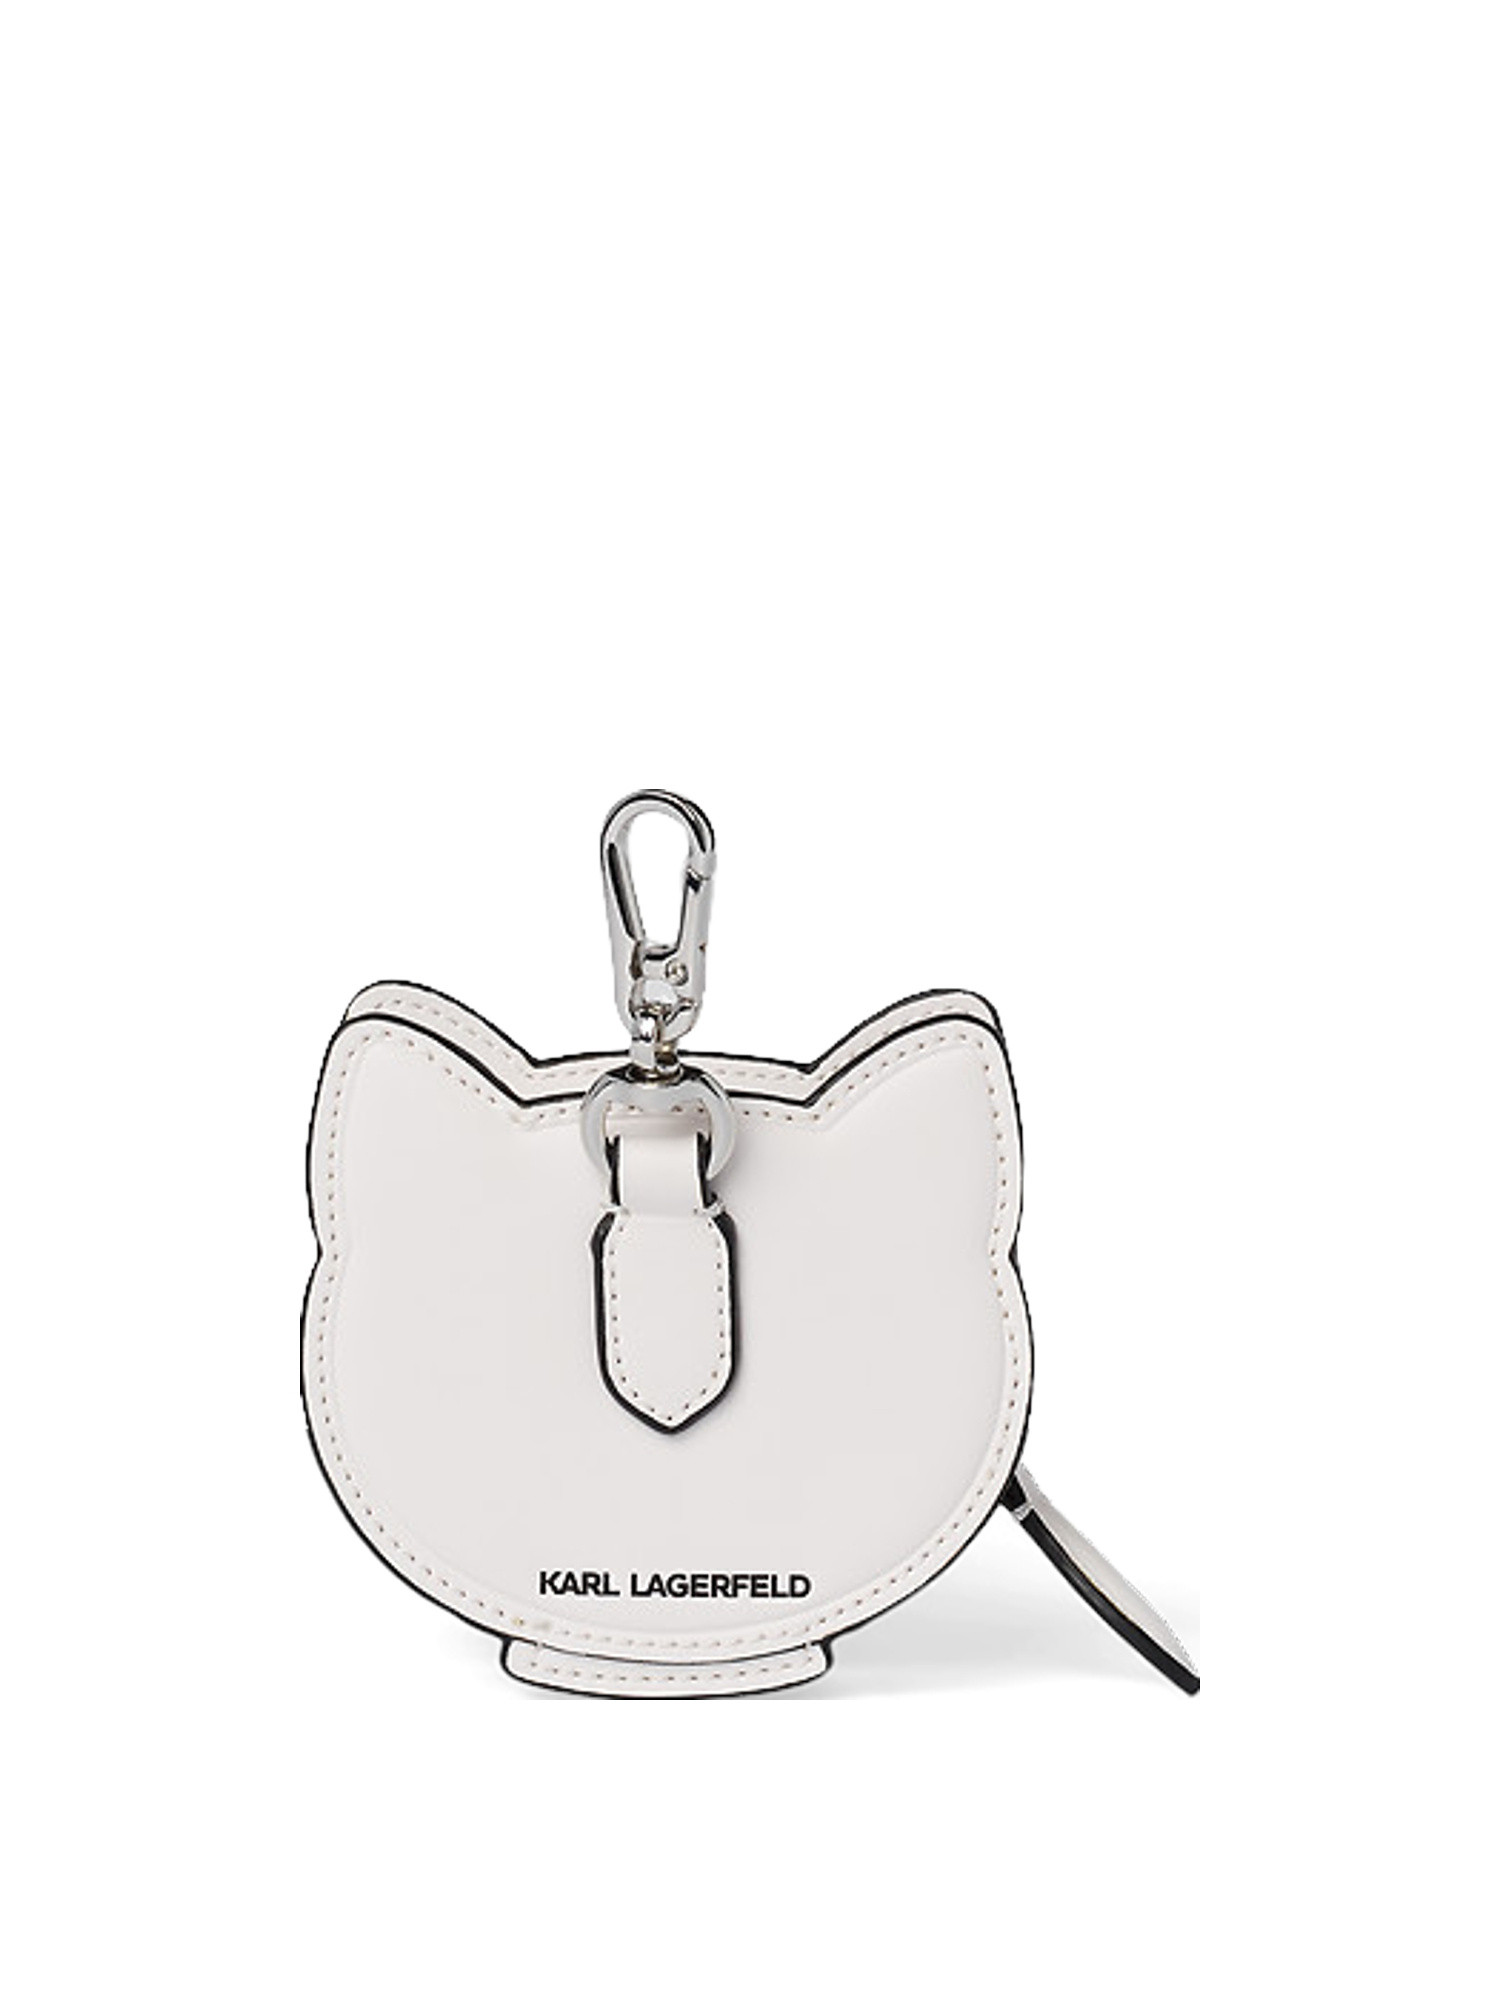 Karl Lagerfeld - K/Choupette Coin Purse, Black, large image number 1